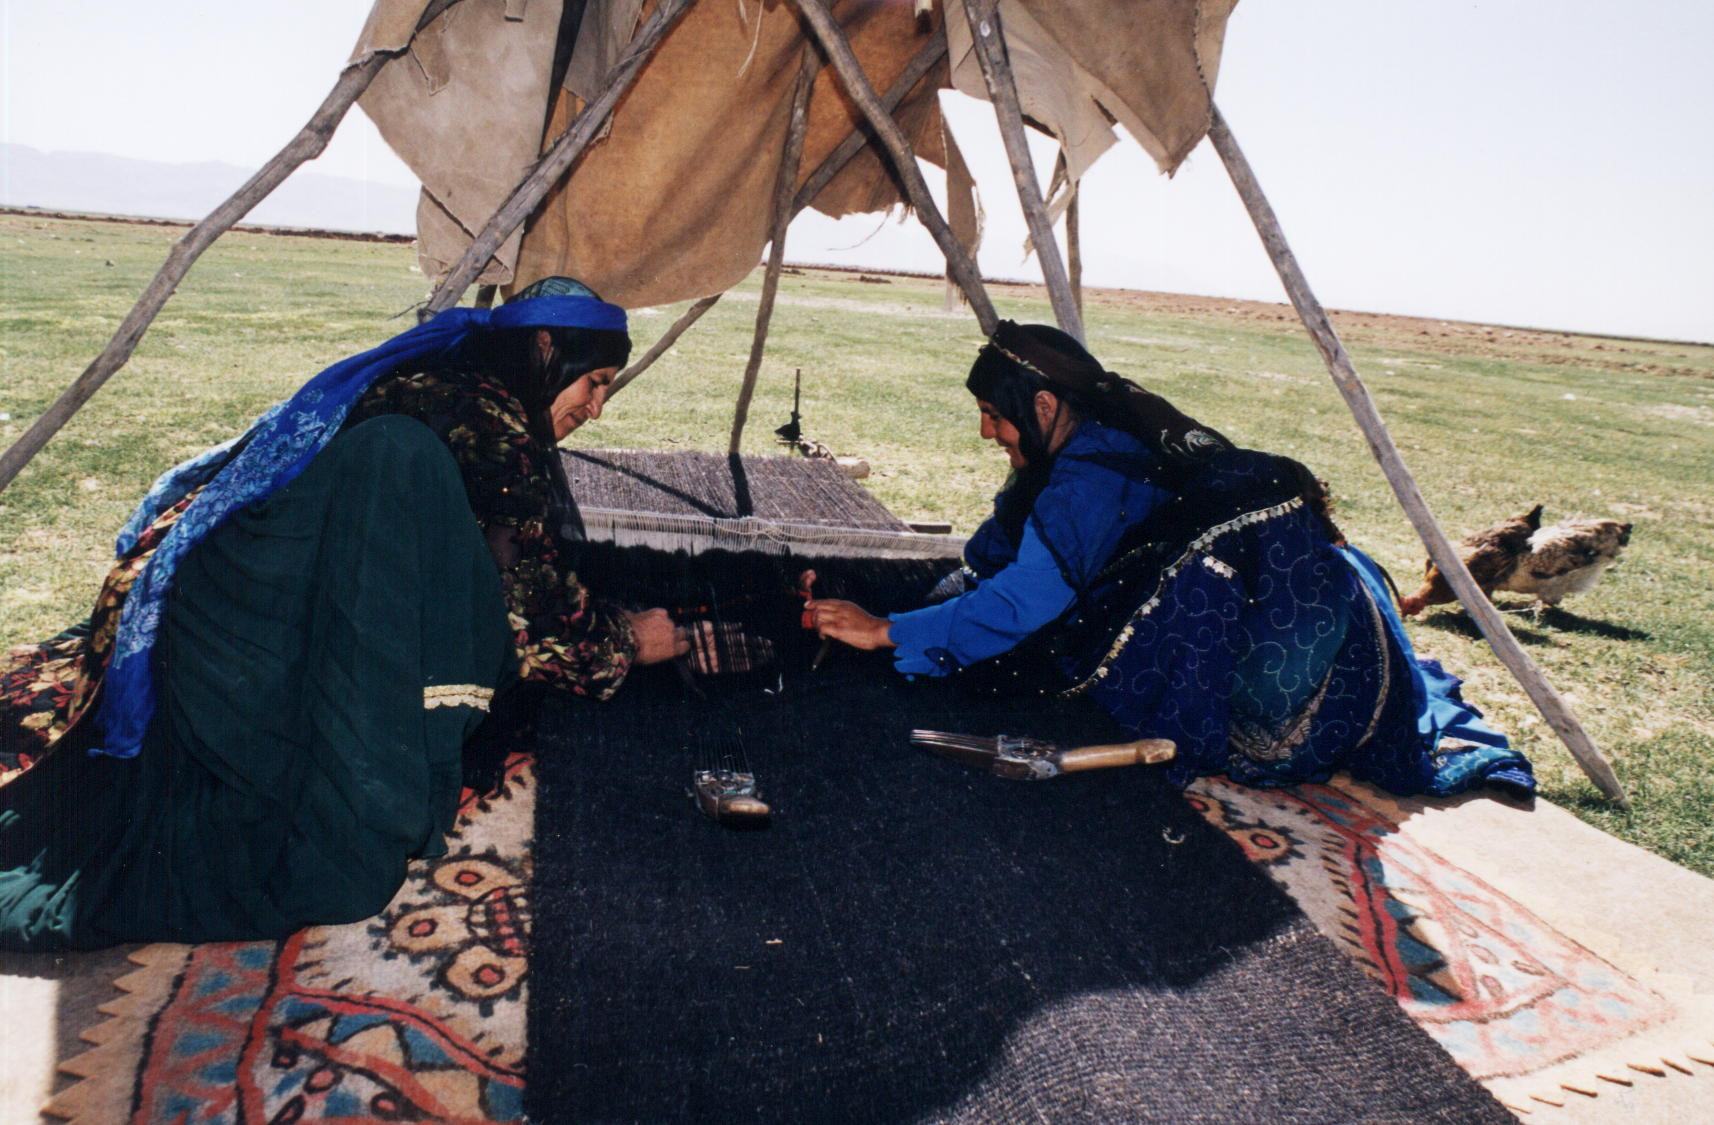 The Nomads of Ardabil